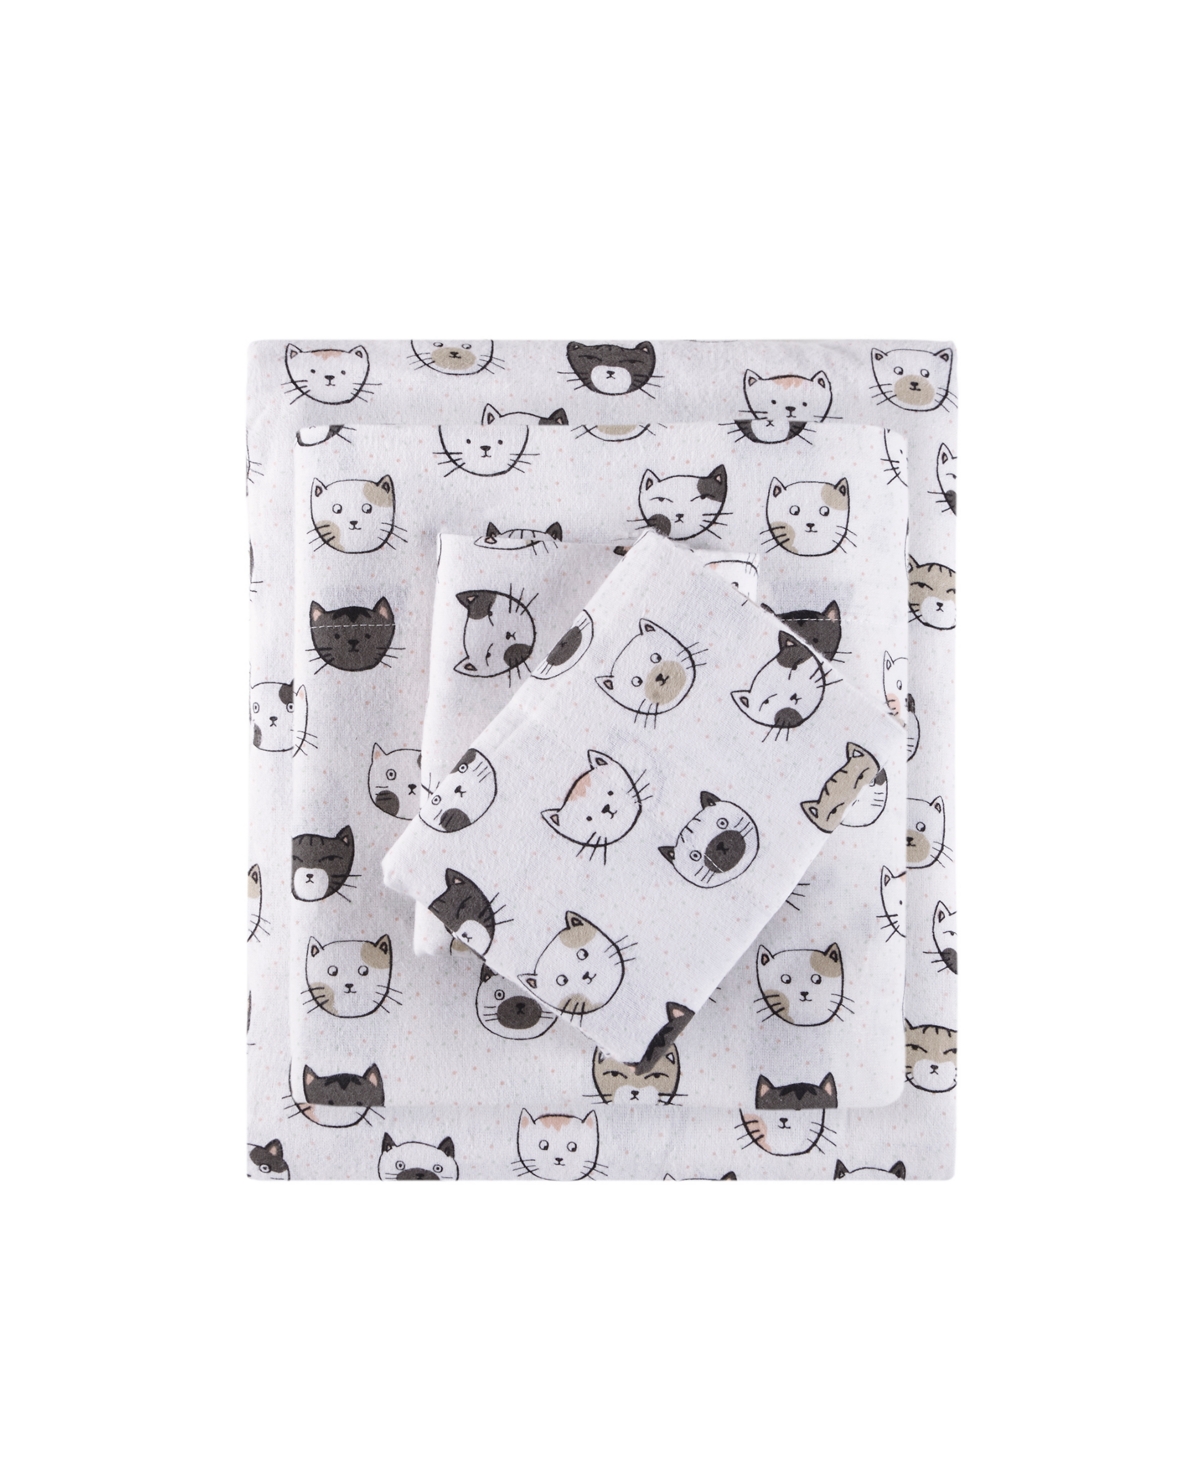 Intelligent Design Novelty Printed Flannel 4-pc. Sheet Set, Queen In Grey,pink Cats